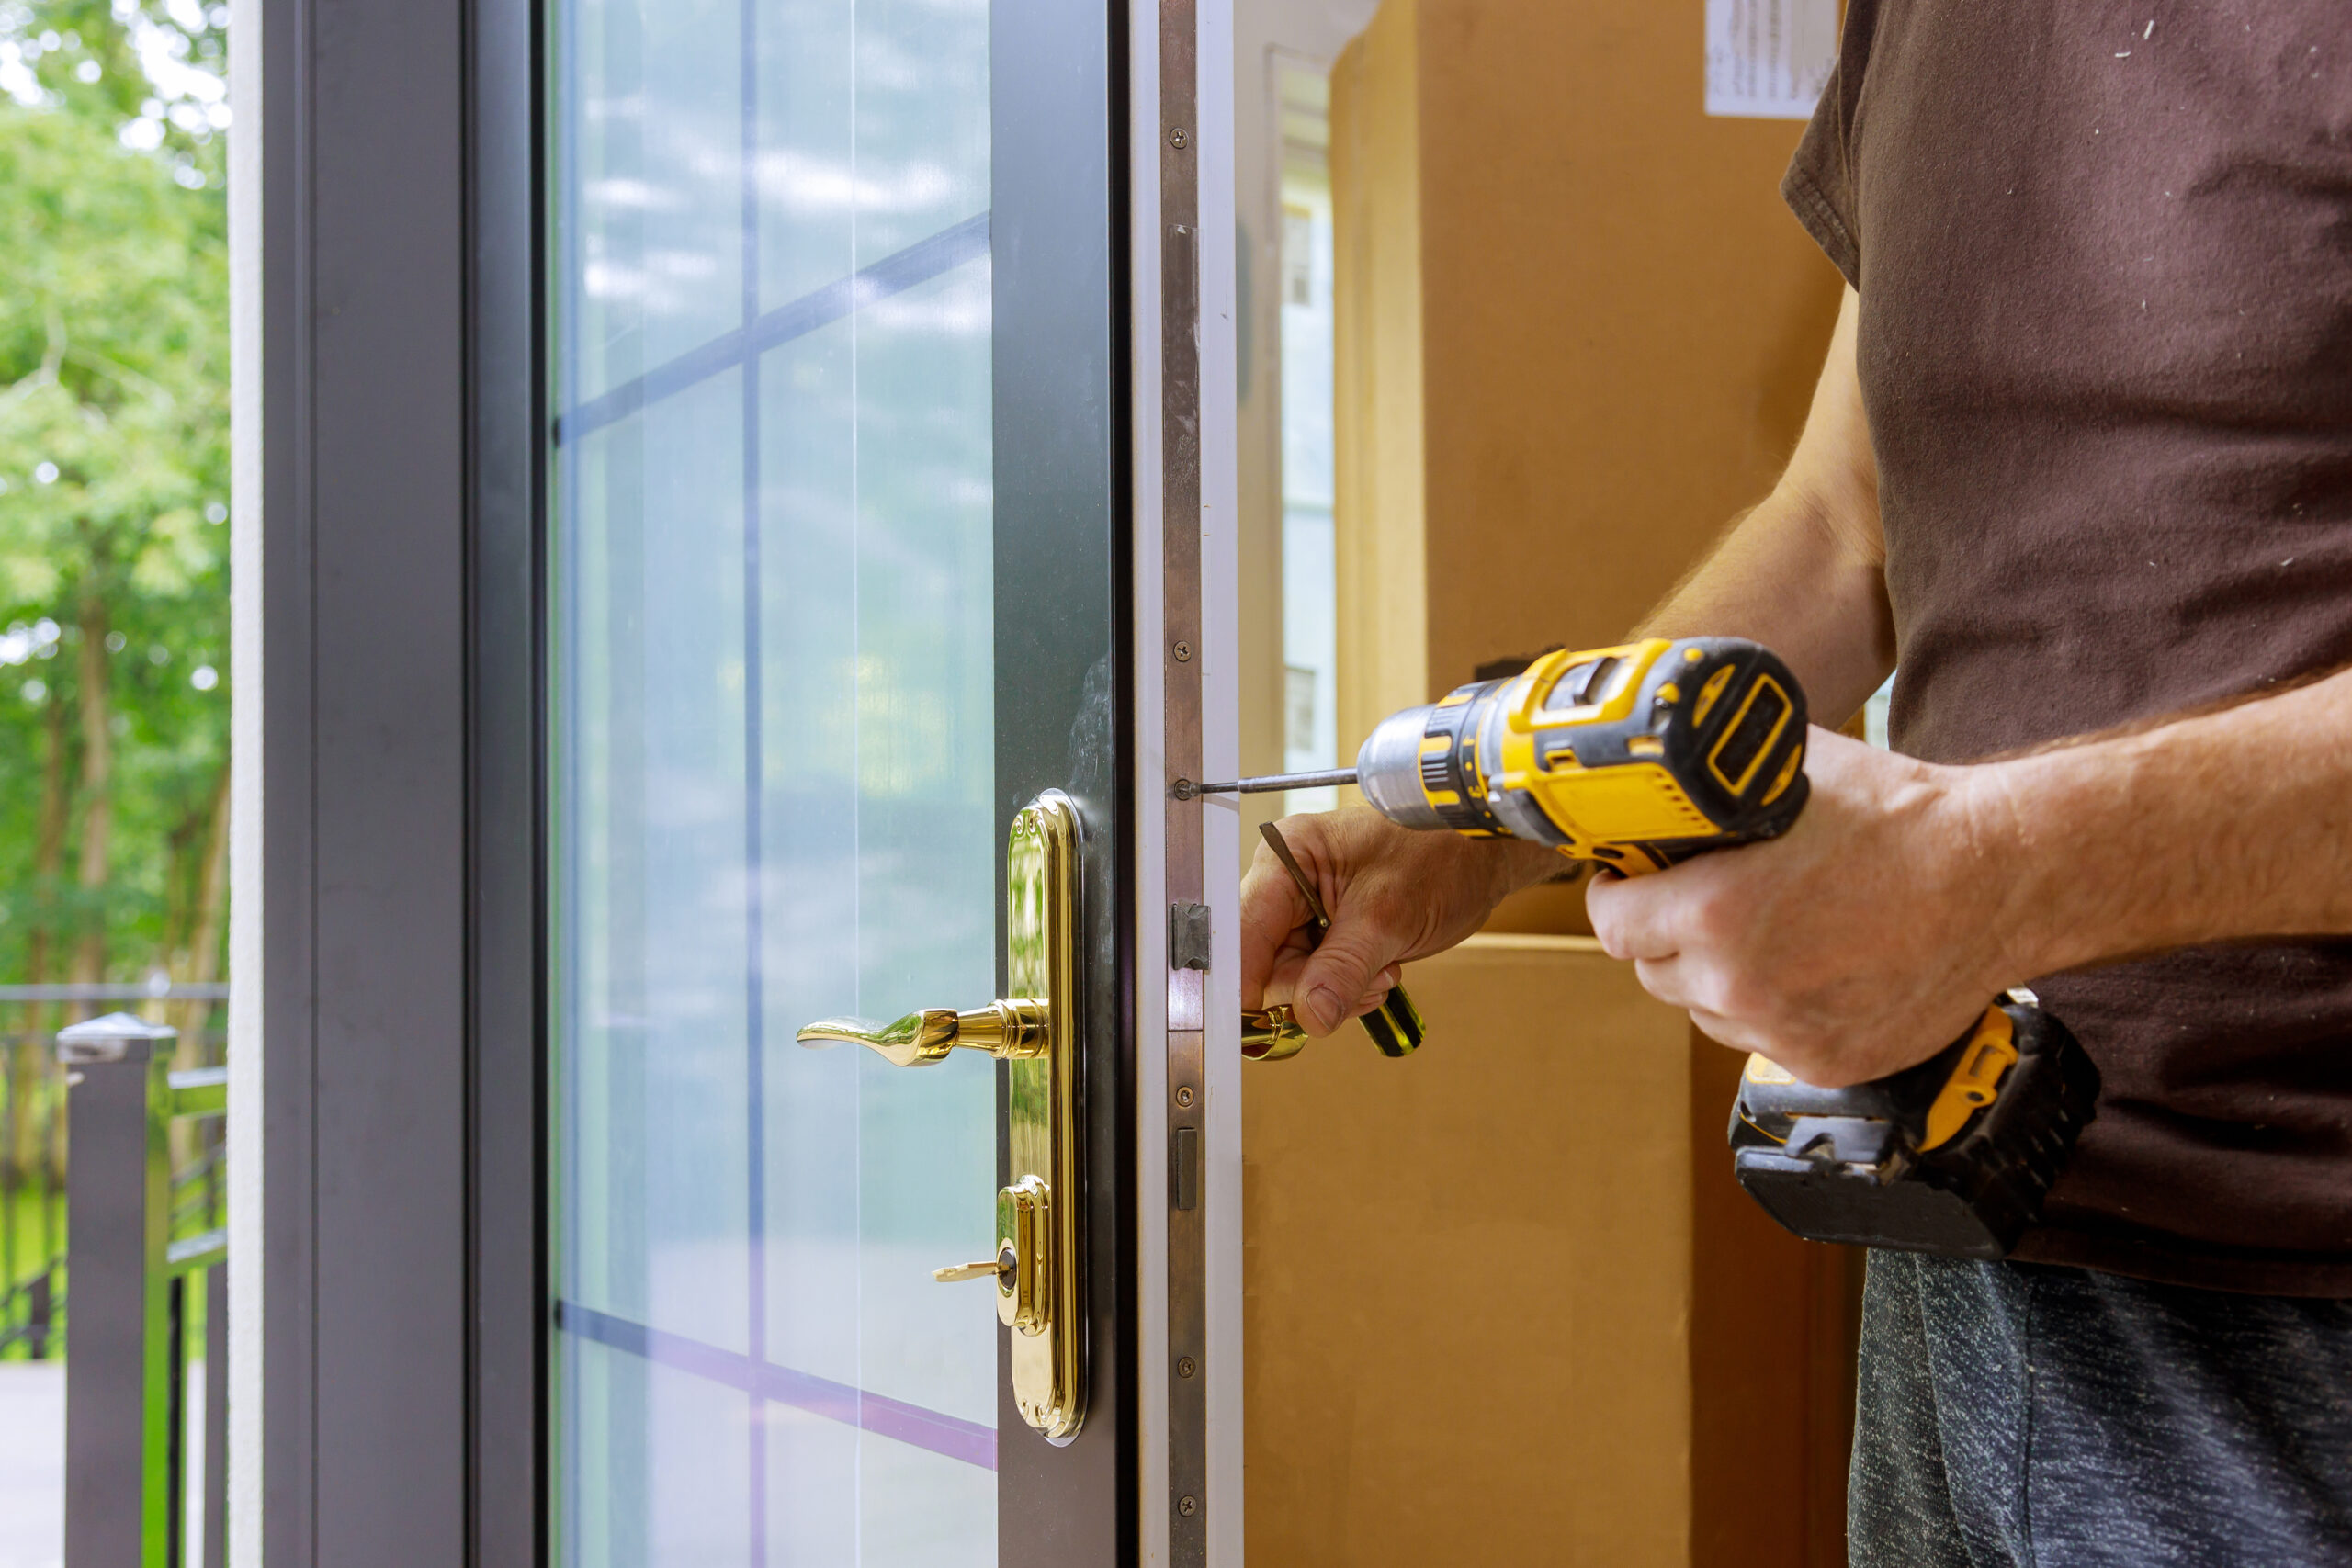 Install the door handle with a lock, Carpenter tighten the screw, using an electric drill screwdriver, close-up.